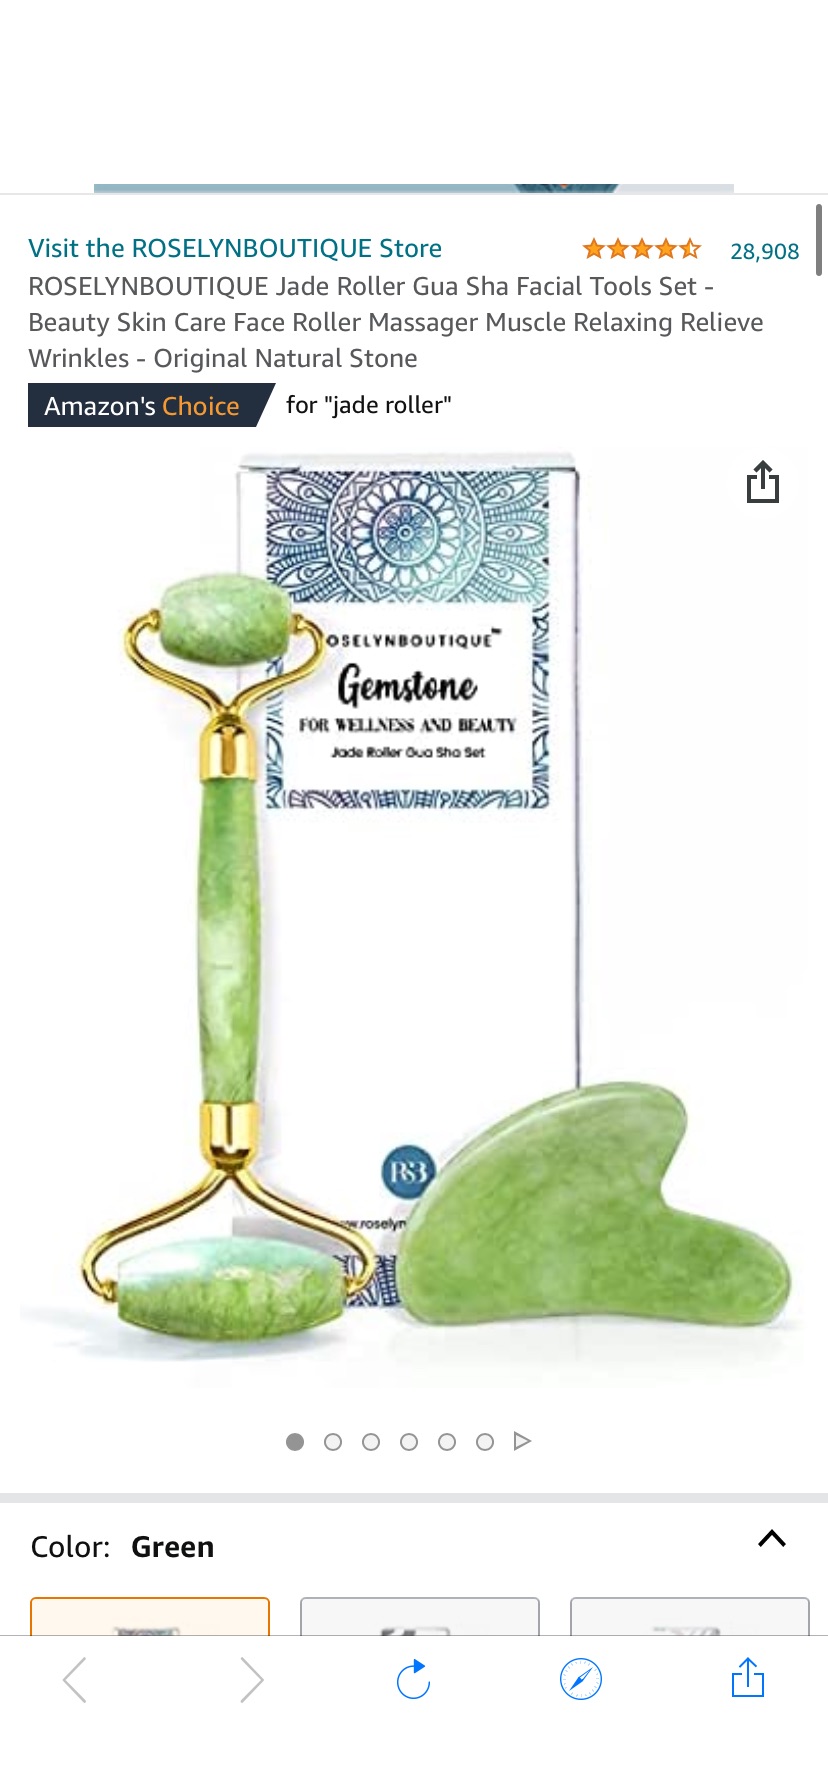 Amazon.com: ROSELYNBOUTIQUE Jade Roller Gua Sha Facial Tools Set - Beauty Skin Care Face Roller Massager Muscle Relaxing Relieve Wrinkles - Original Natural Stone美容仪